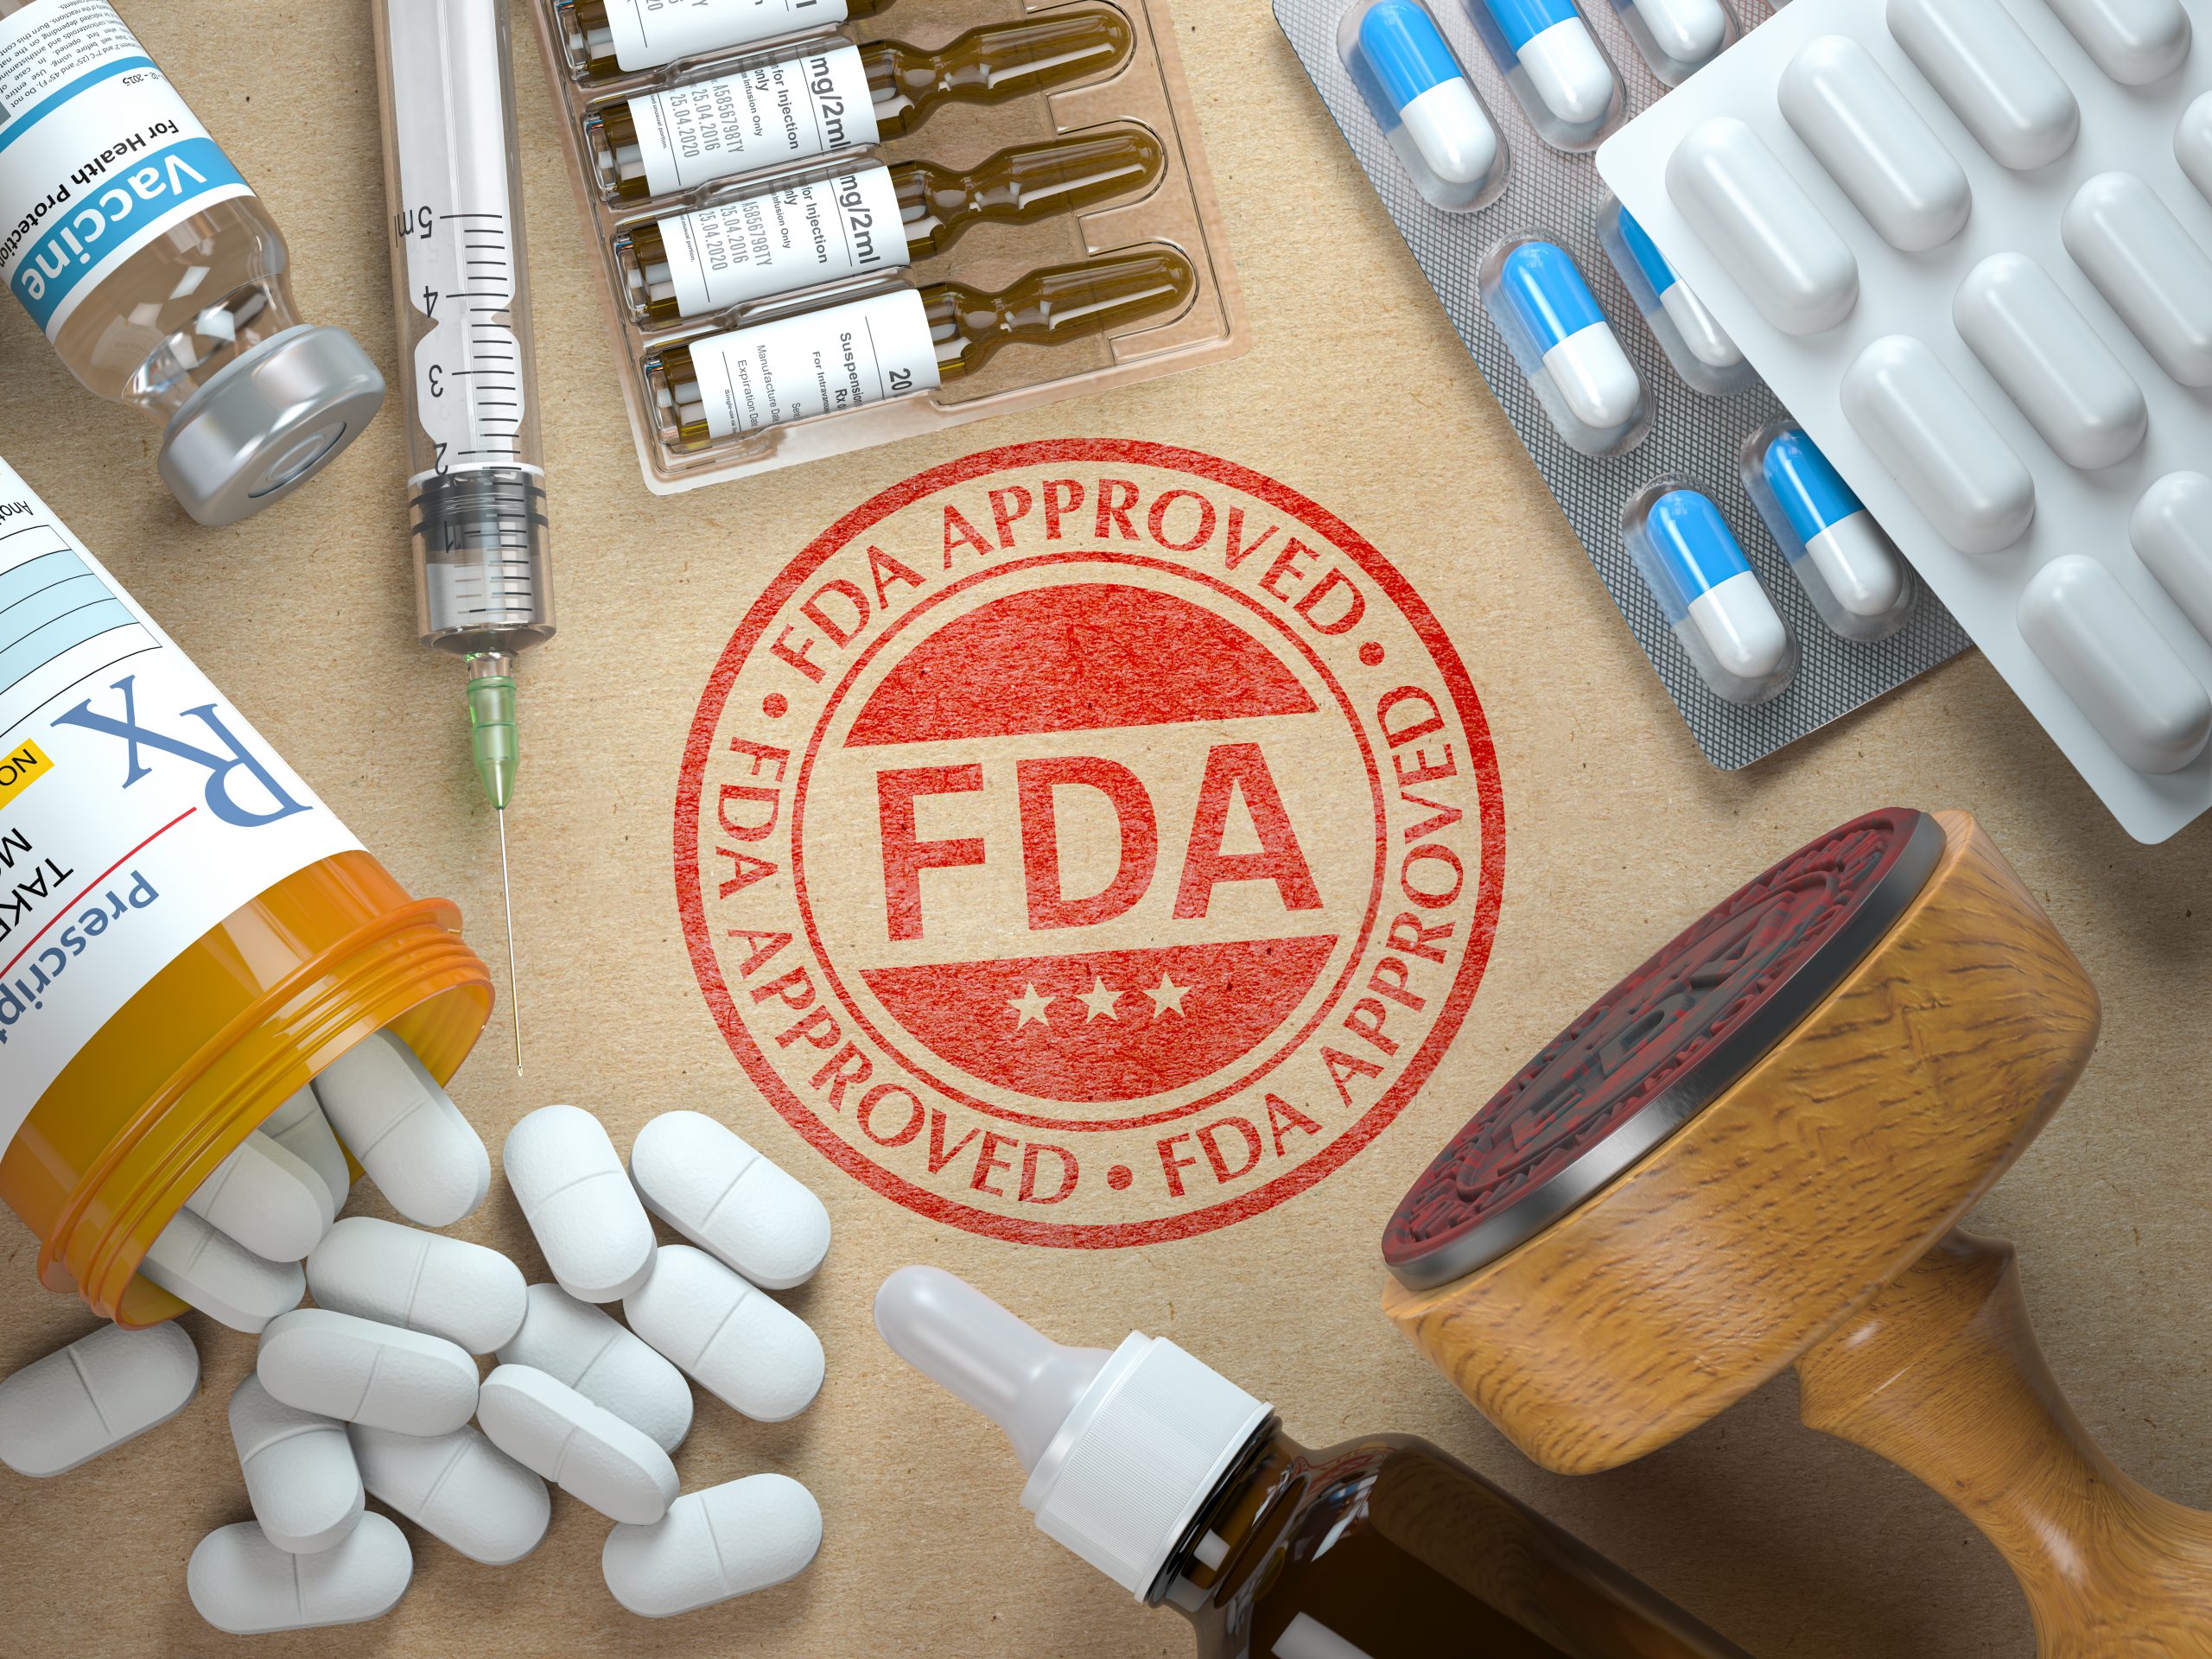 With just 16 new drugs approved in H1 2022, FDA poised for slew of approvals in H2